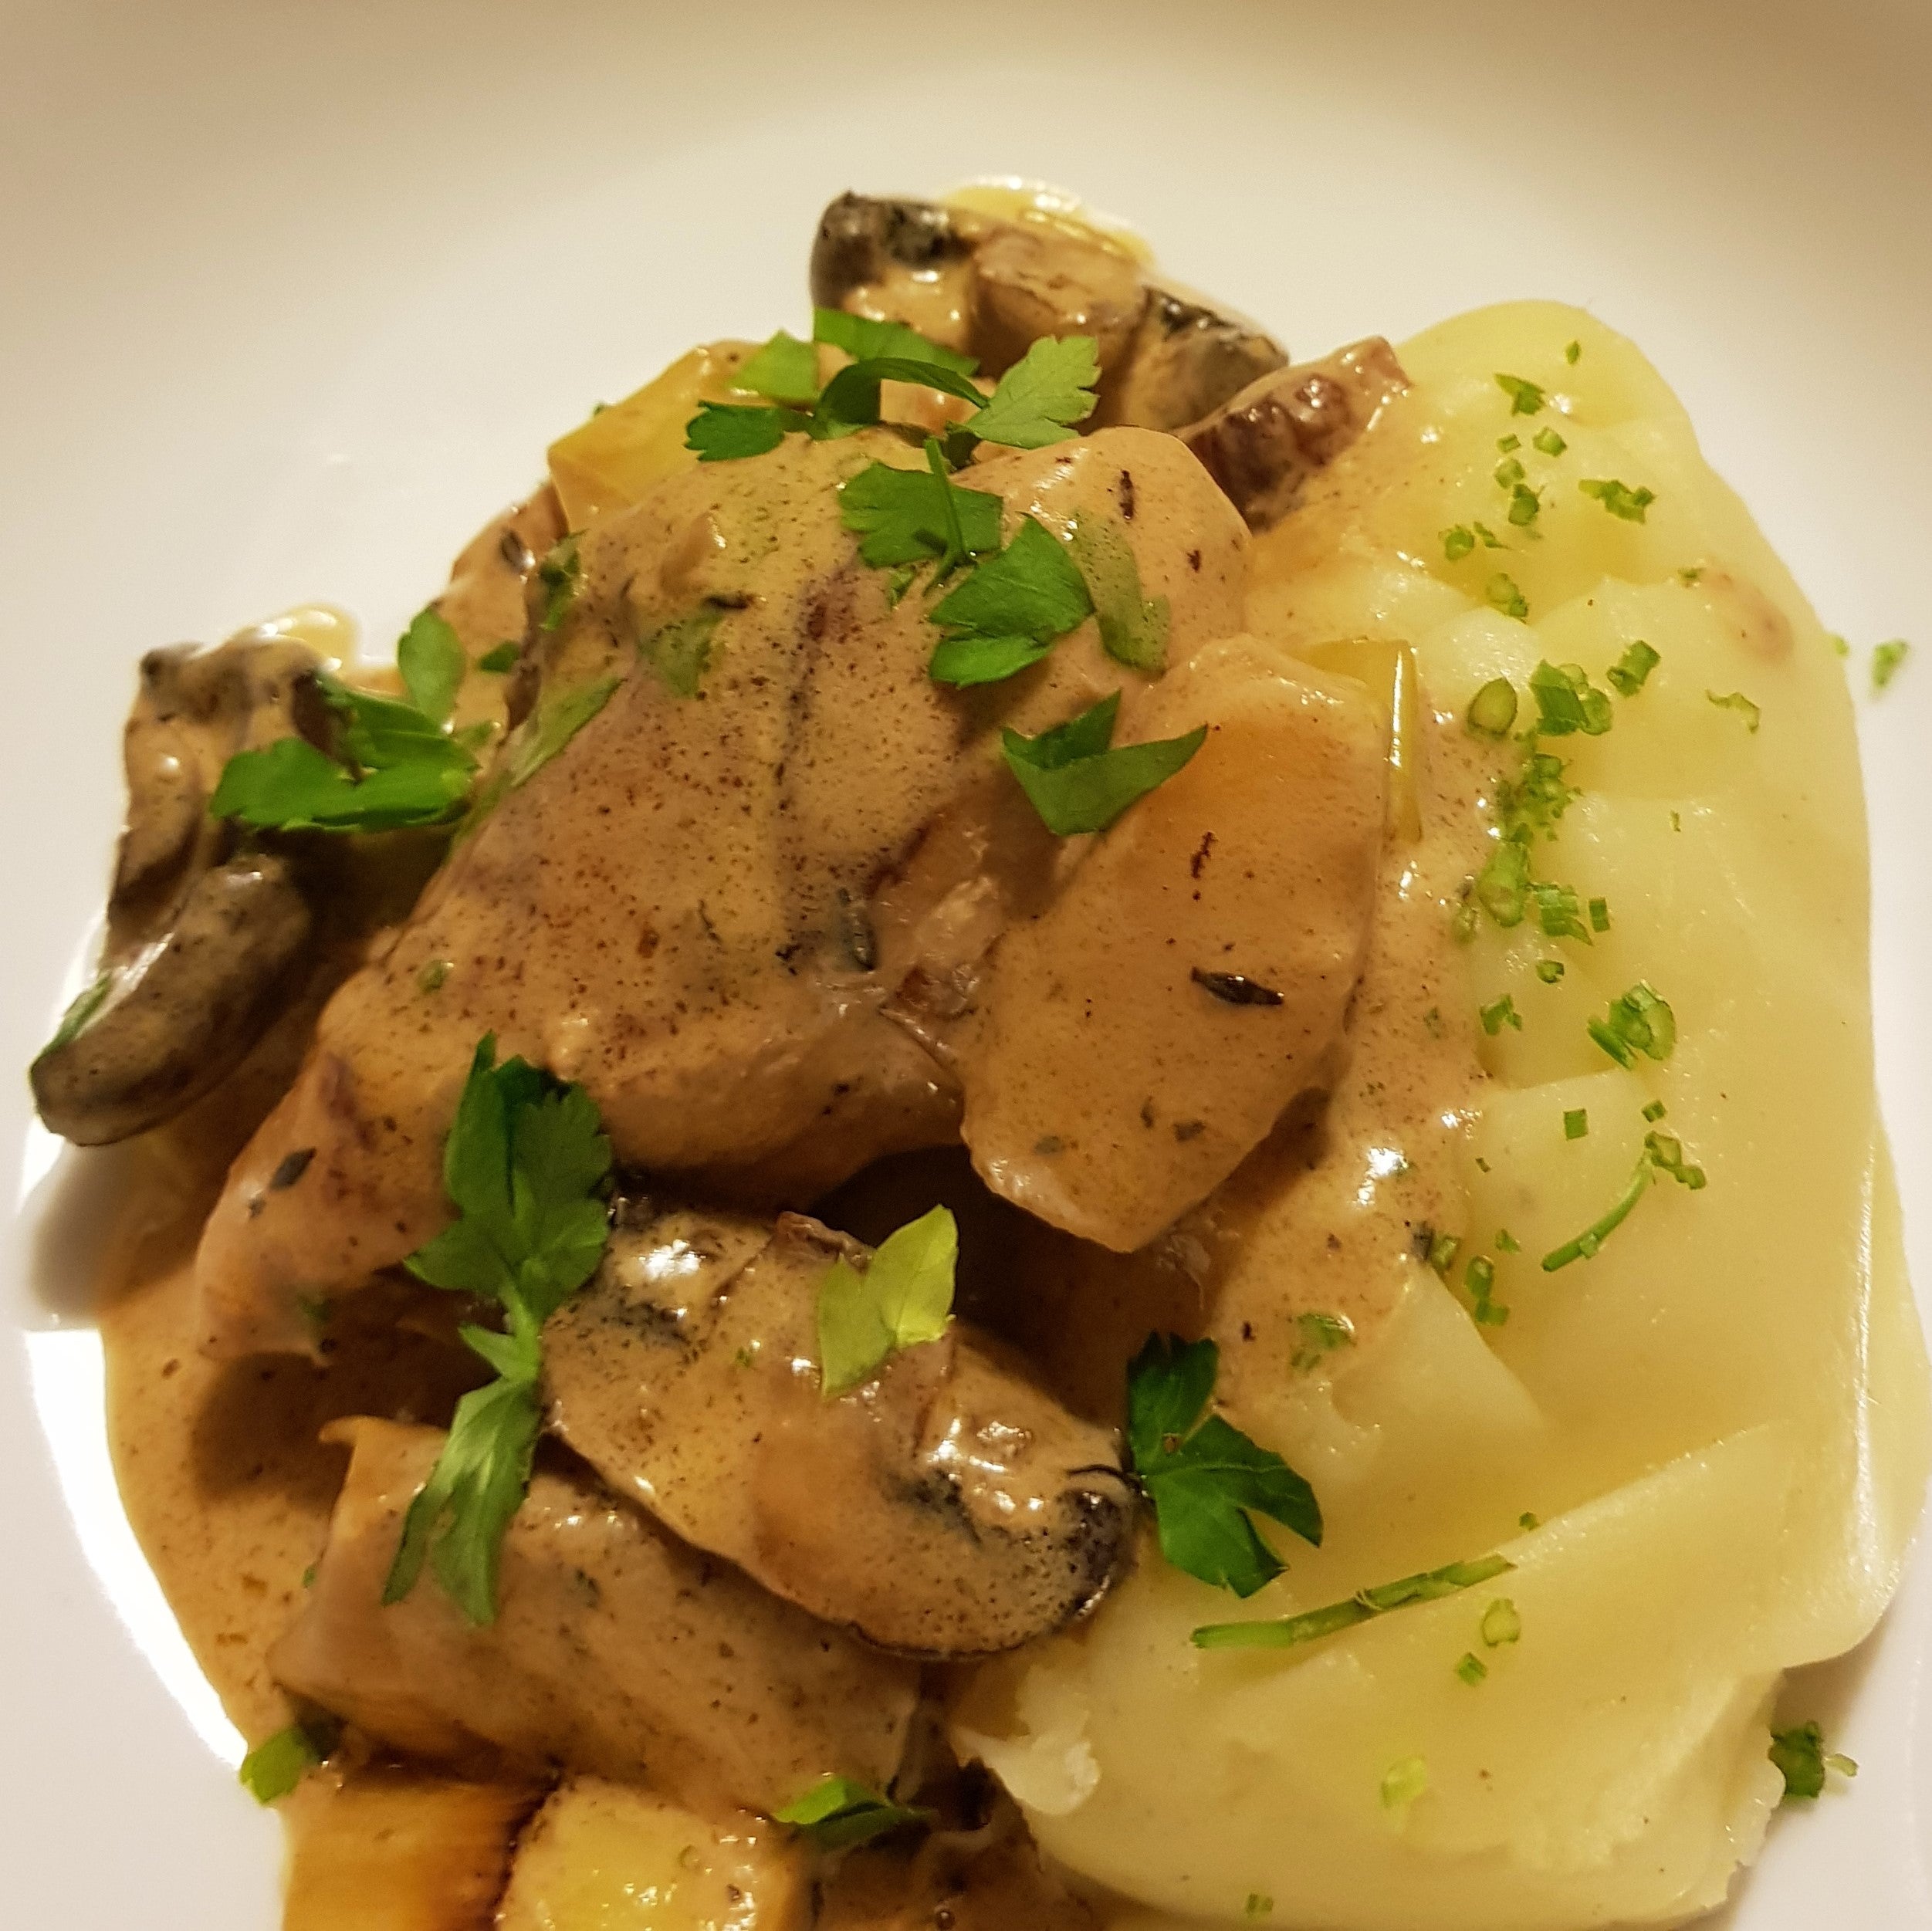 Normandy chicken and mash with fresh chopped parsley